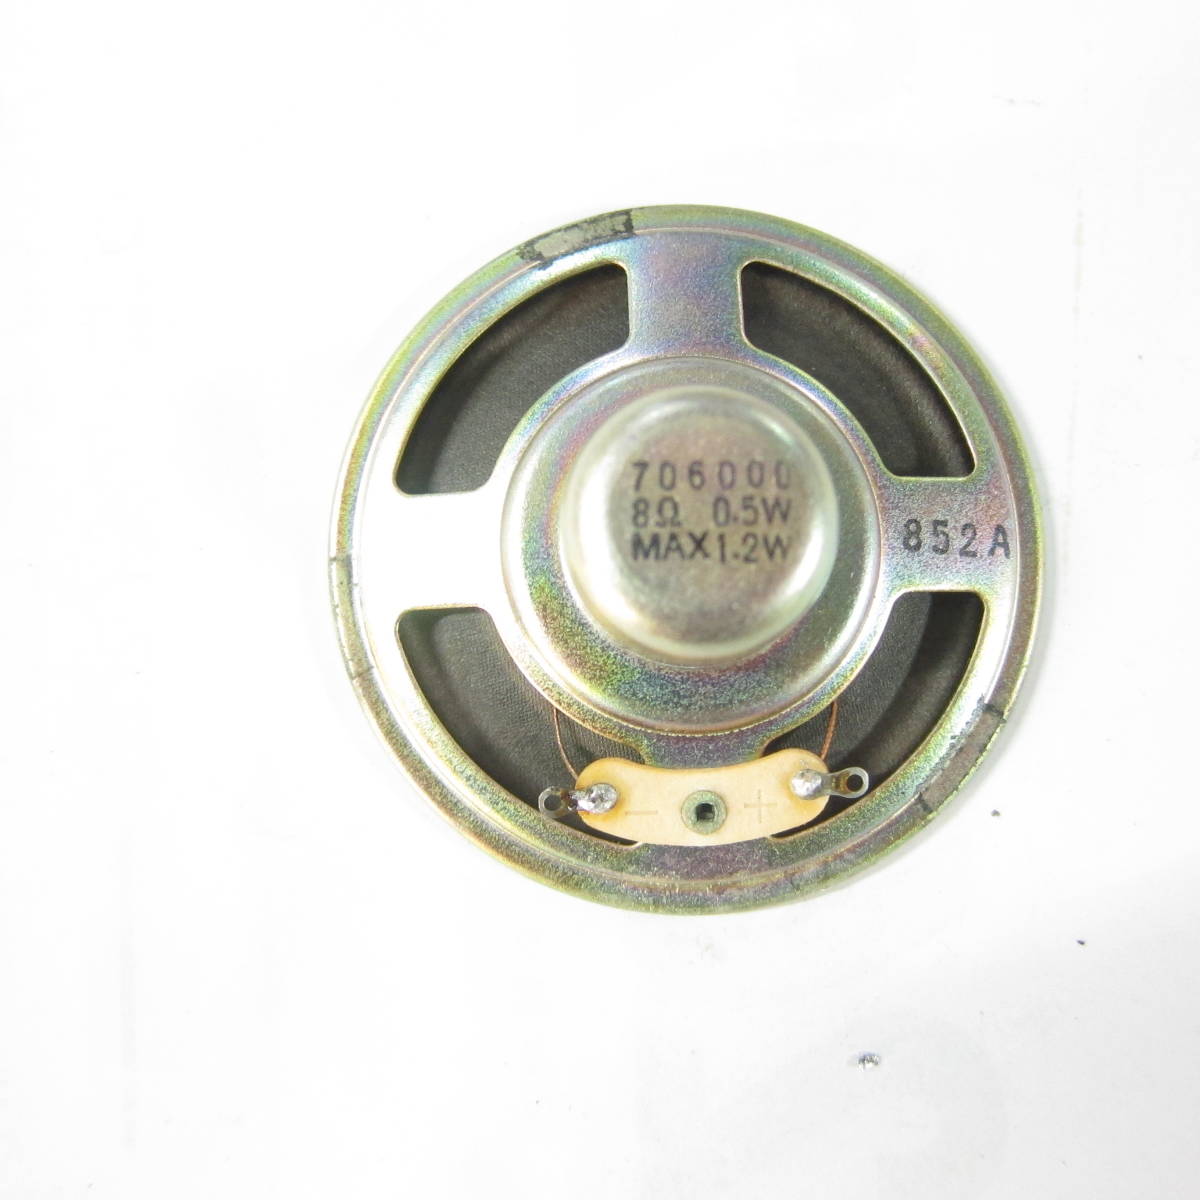 66mm small size speaker 0.5W8Ω radio from removal goods 10-40-1